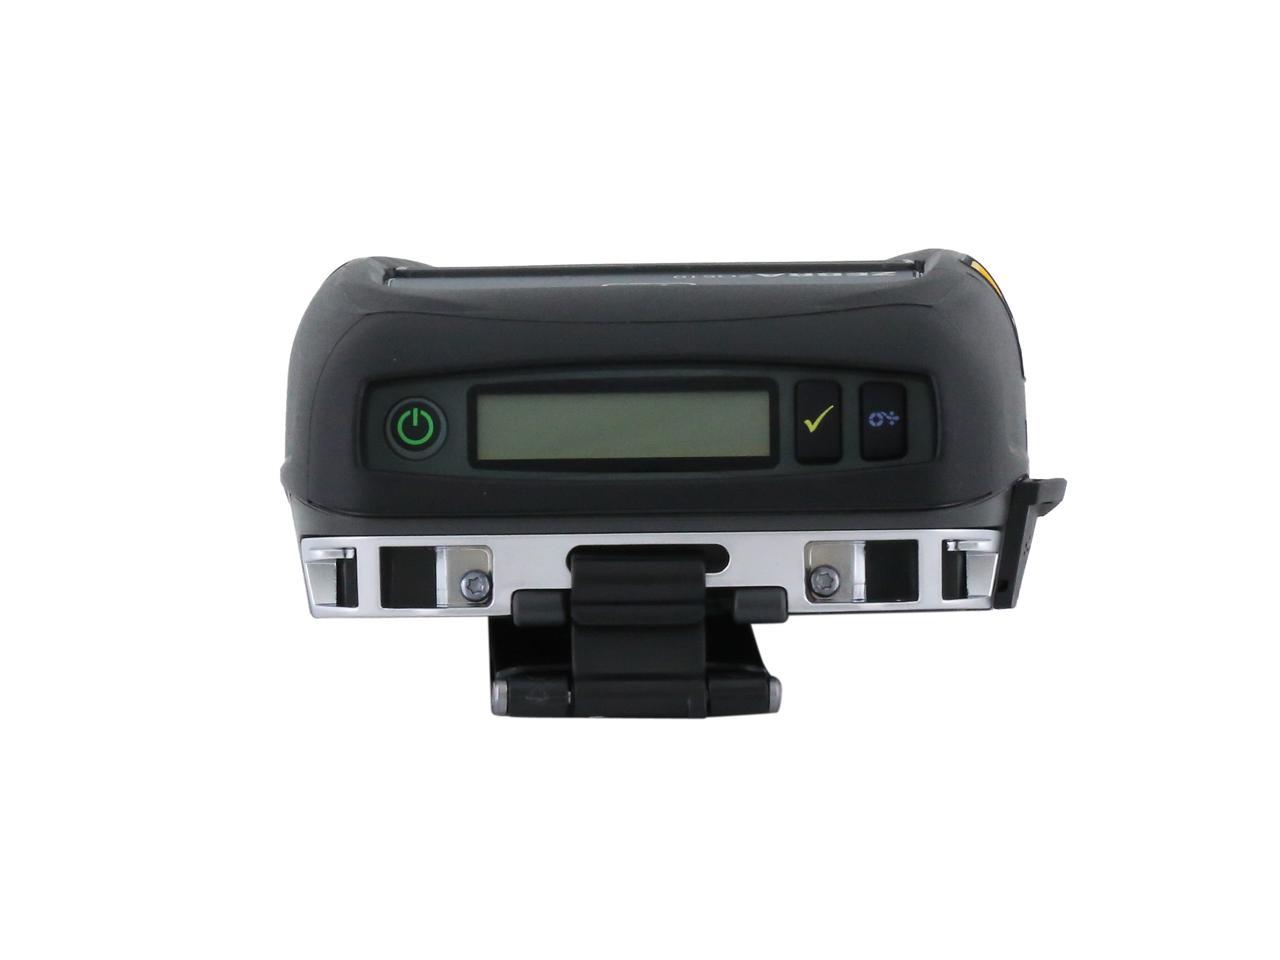 Zebra Zq510 3 Mobile Direct Thermal Receipt And Label Printer 203 Dpi Bluetooth 40 Linered 8802